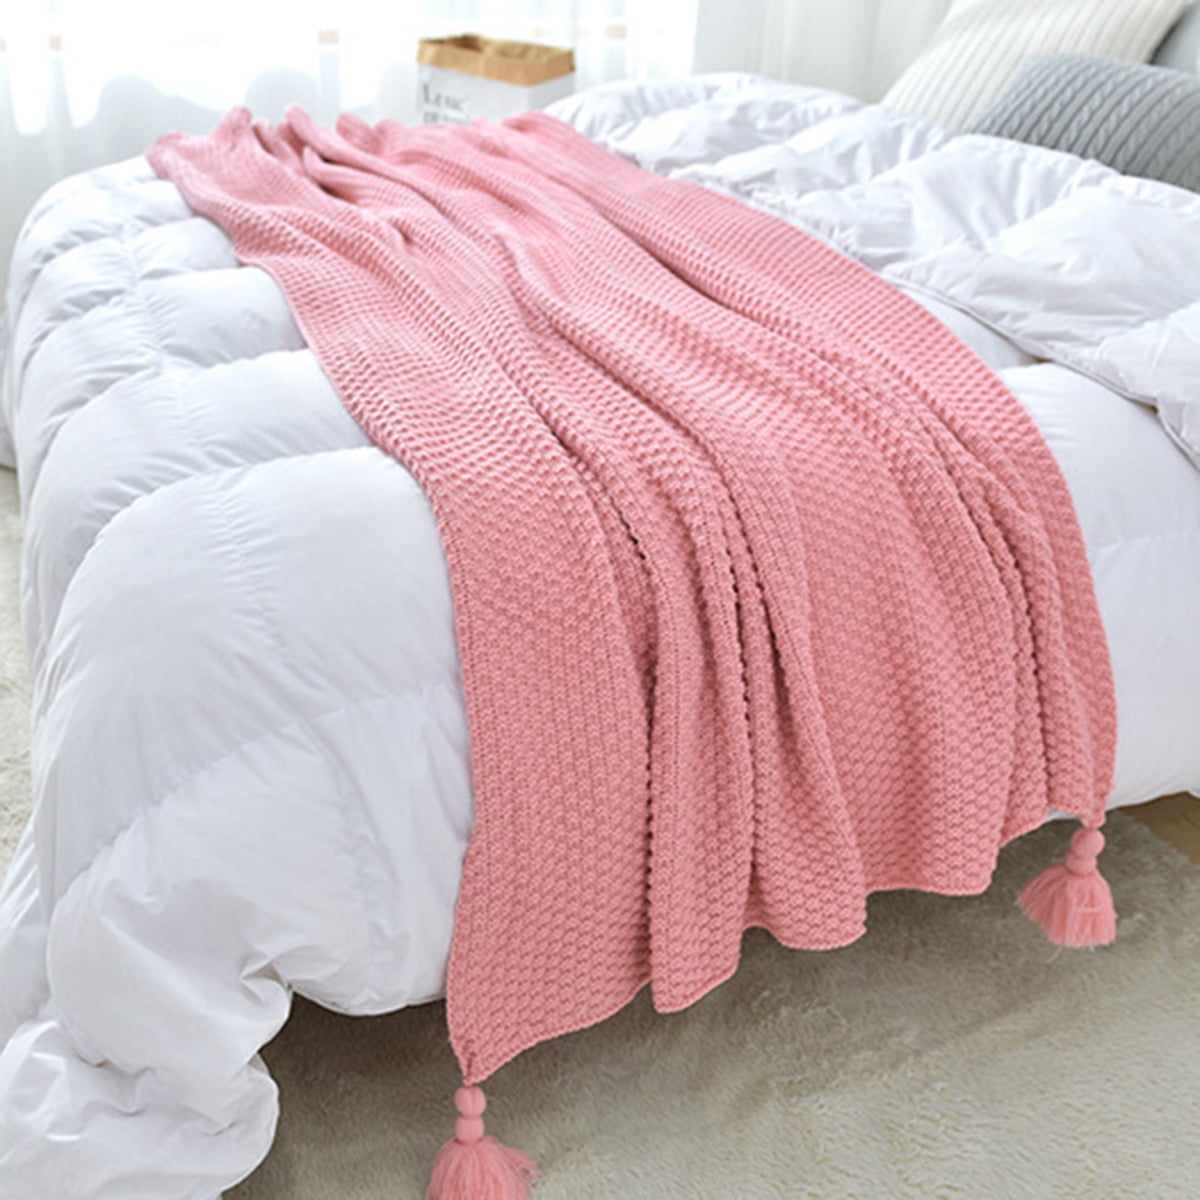 Knitted Woven Blanket for Ladies Pink Fringed Decorative Blanket 50x60 Inches Men and Children Texture Blanket for Sofa Bed Sofa Travel NC Knitted Blanket